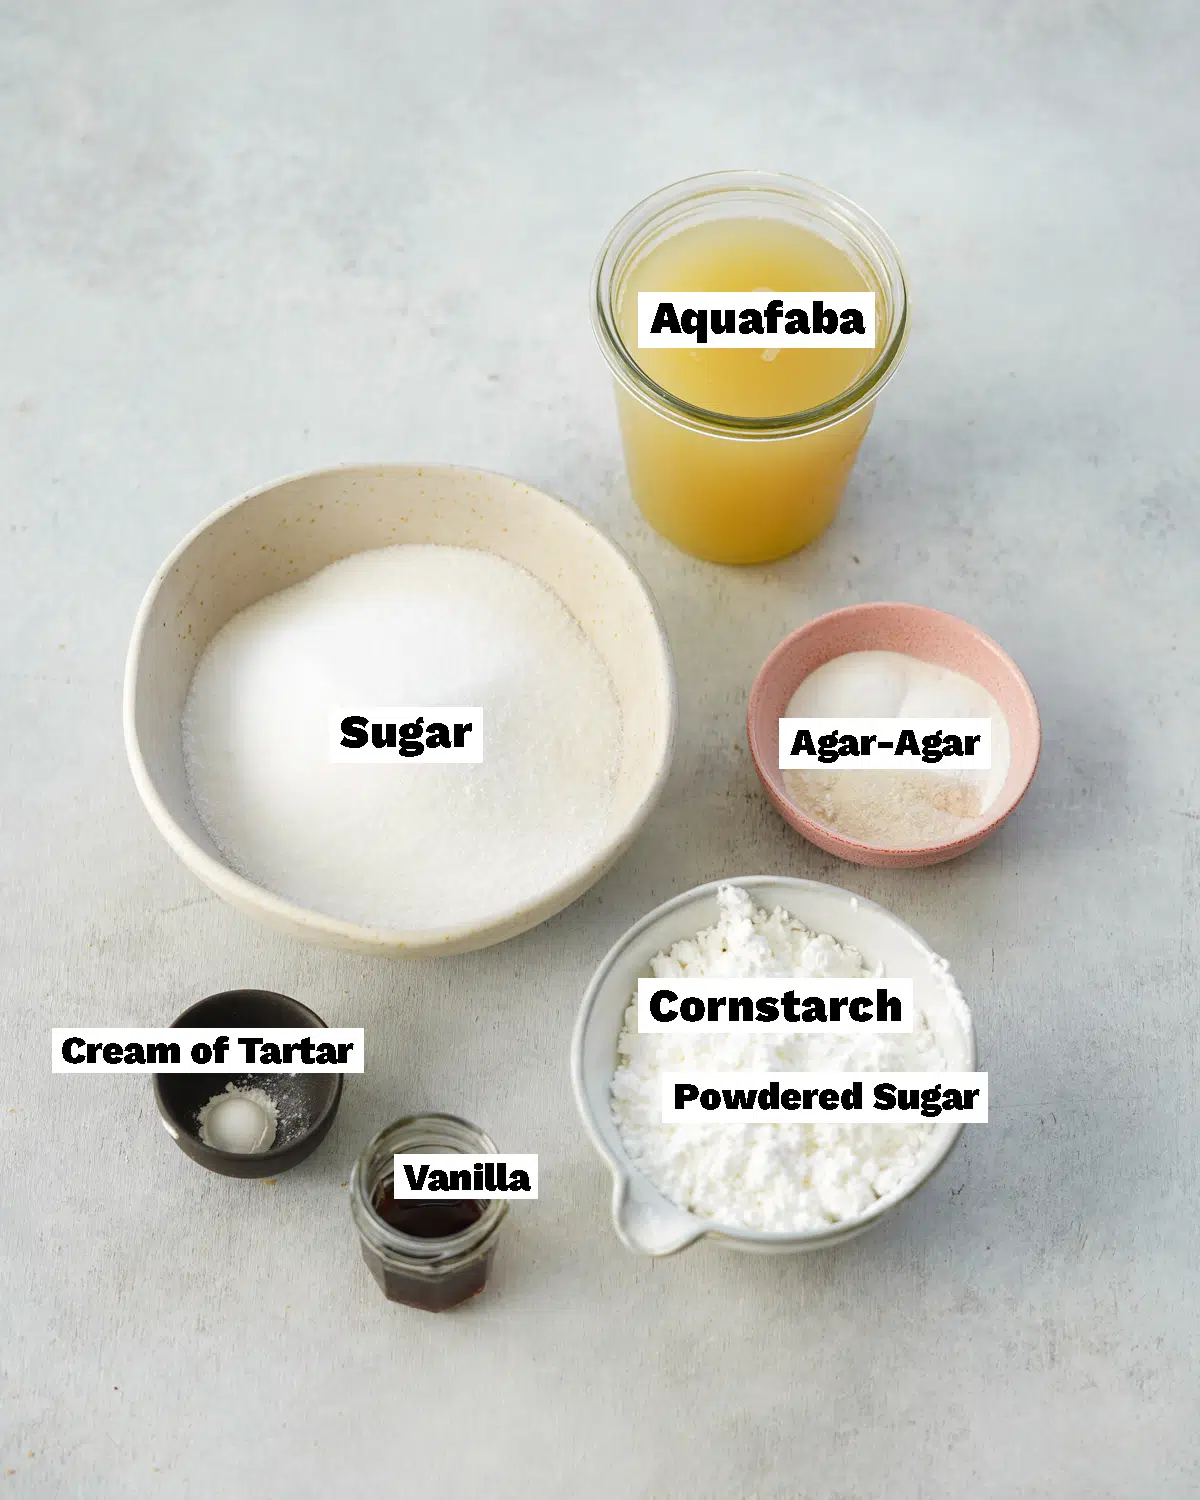 ingredients to make vegetarian marshmallows measured out in bowls and jars.